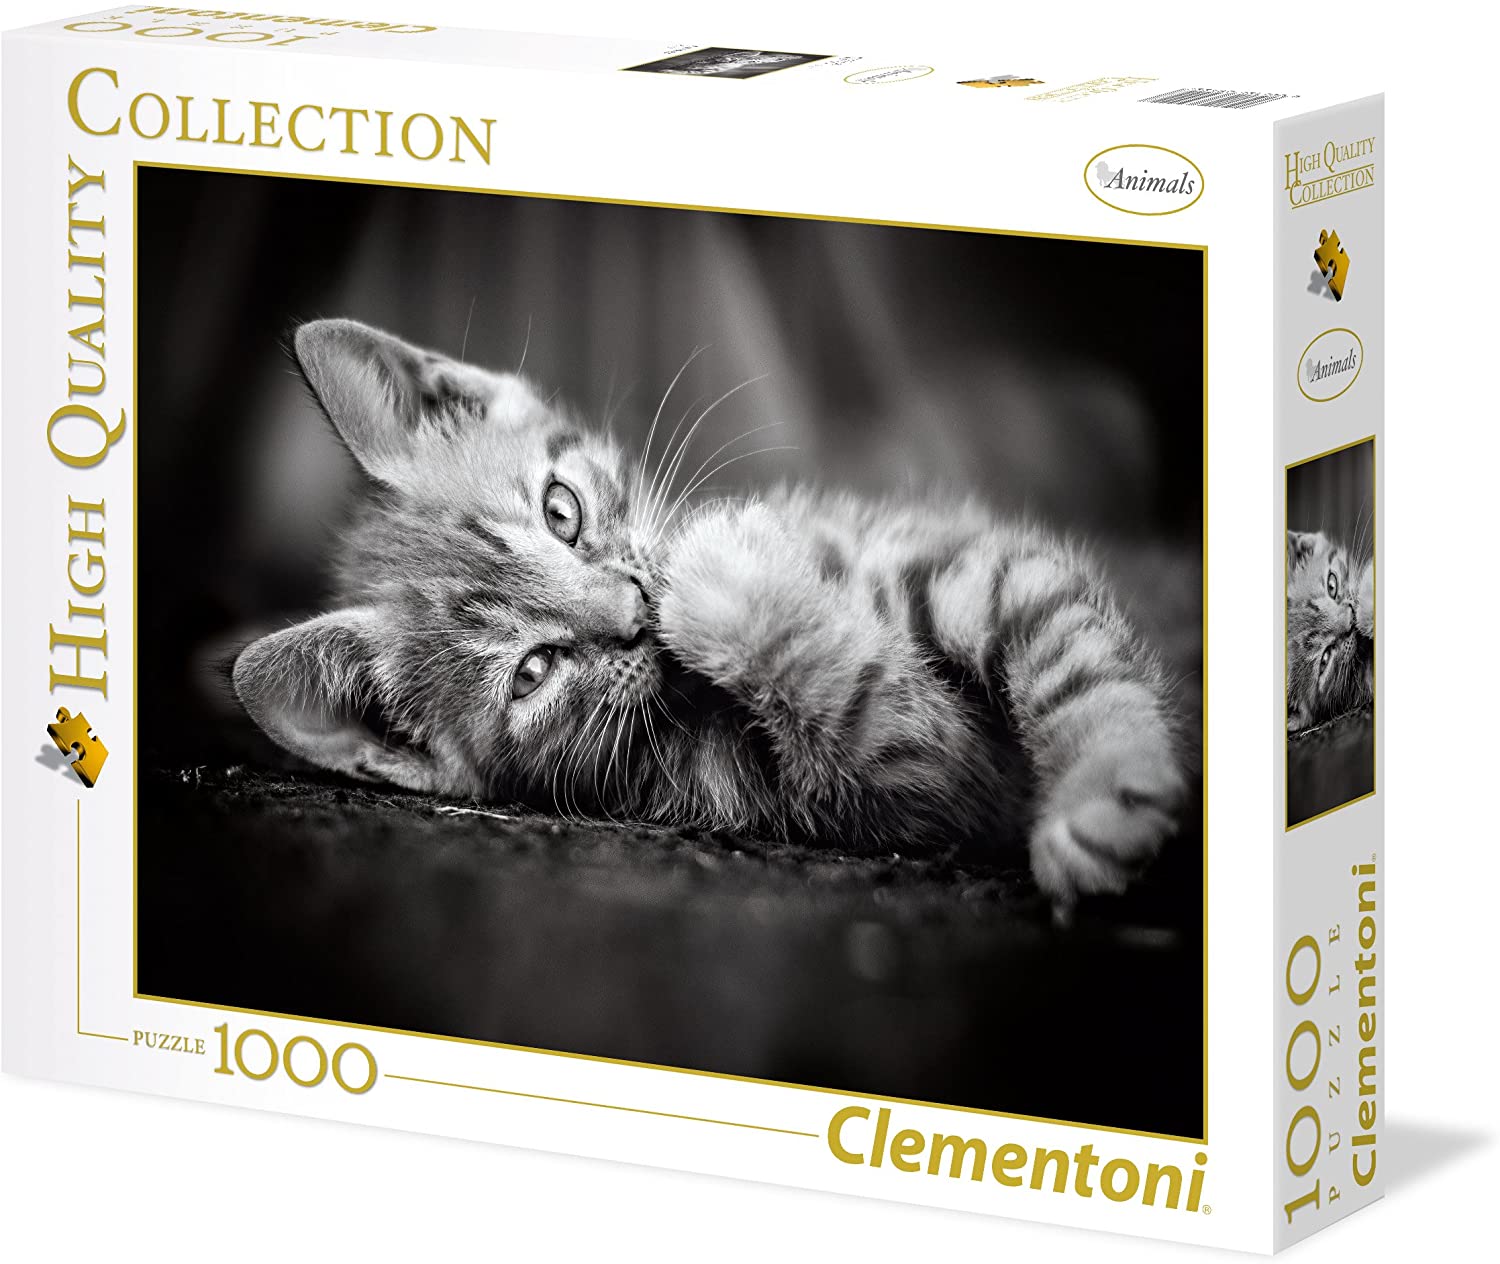 CLEMENTONI - BOARD GAME - 1000PCS - HIGH QUALITY COLLECTION - PUZZLE - MOD: CLM39422